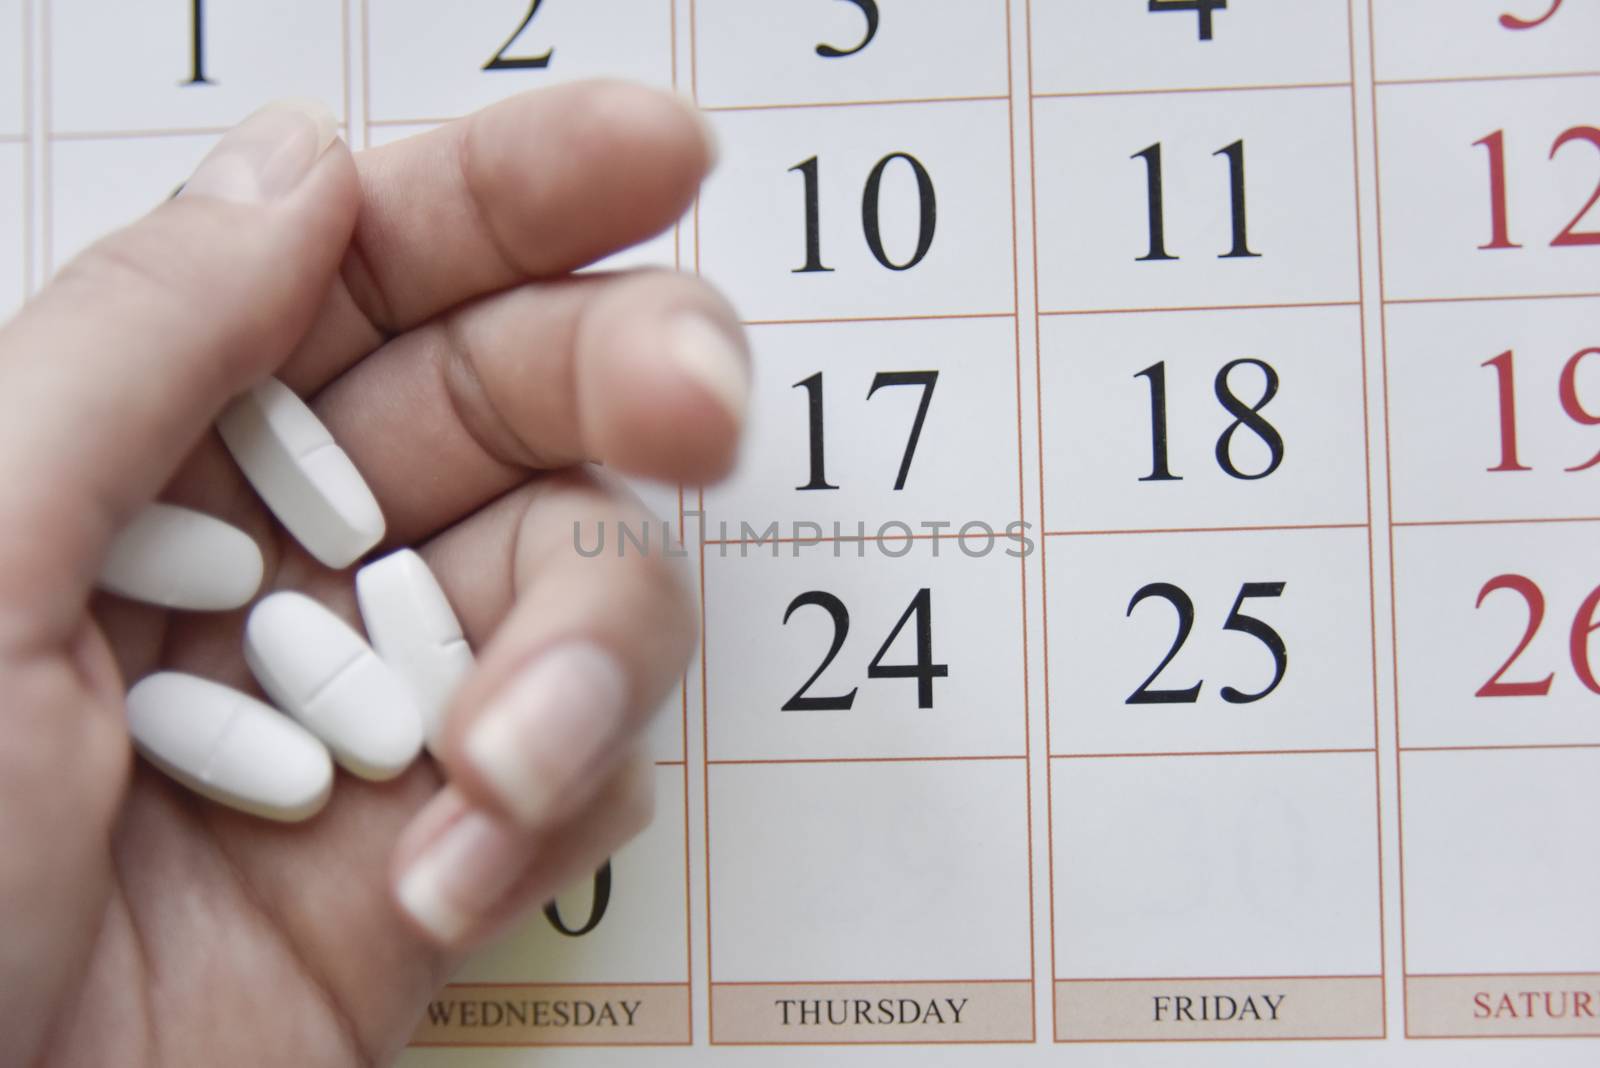 selective focus at pills and calendar with blurry hand. schedu;ed treatment concept